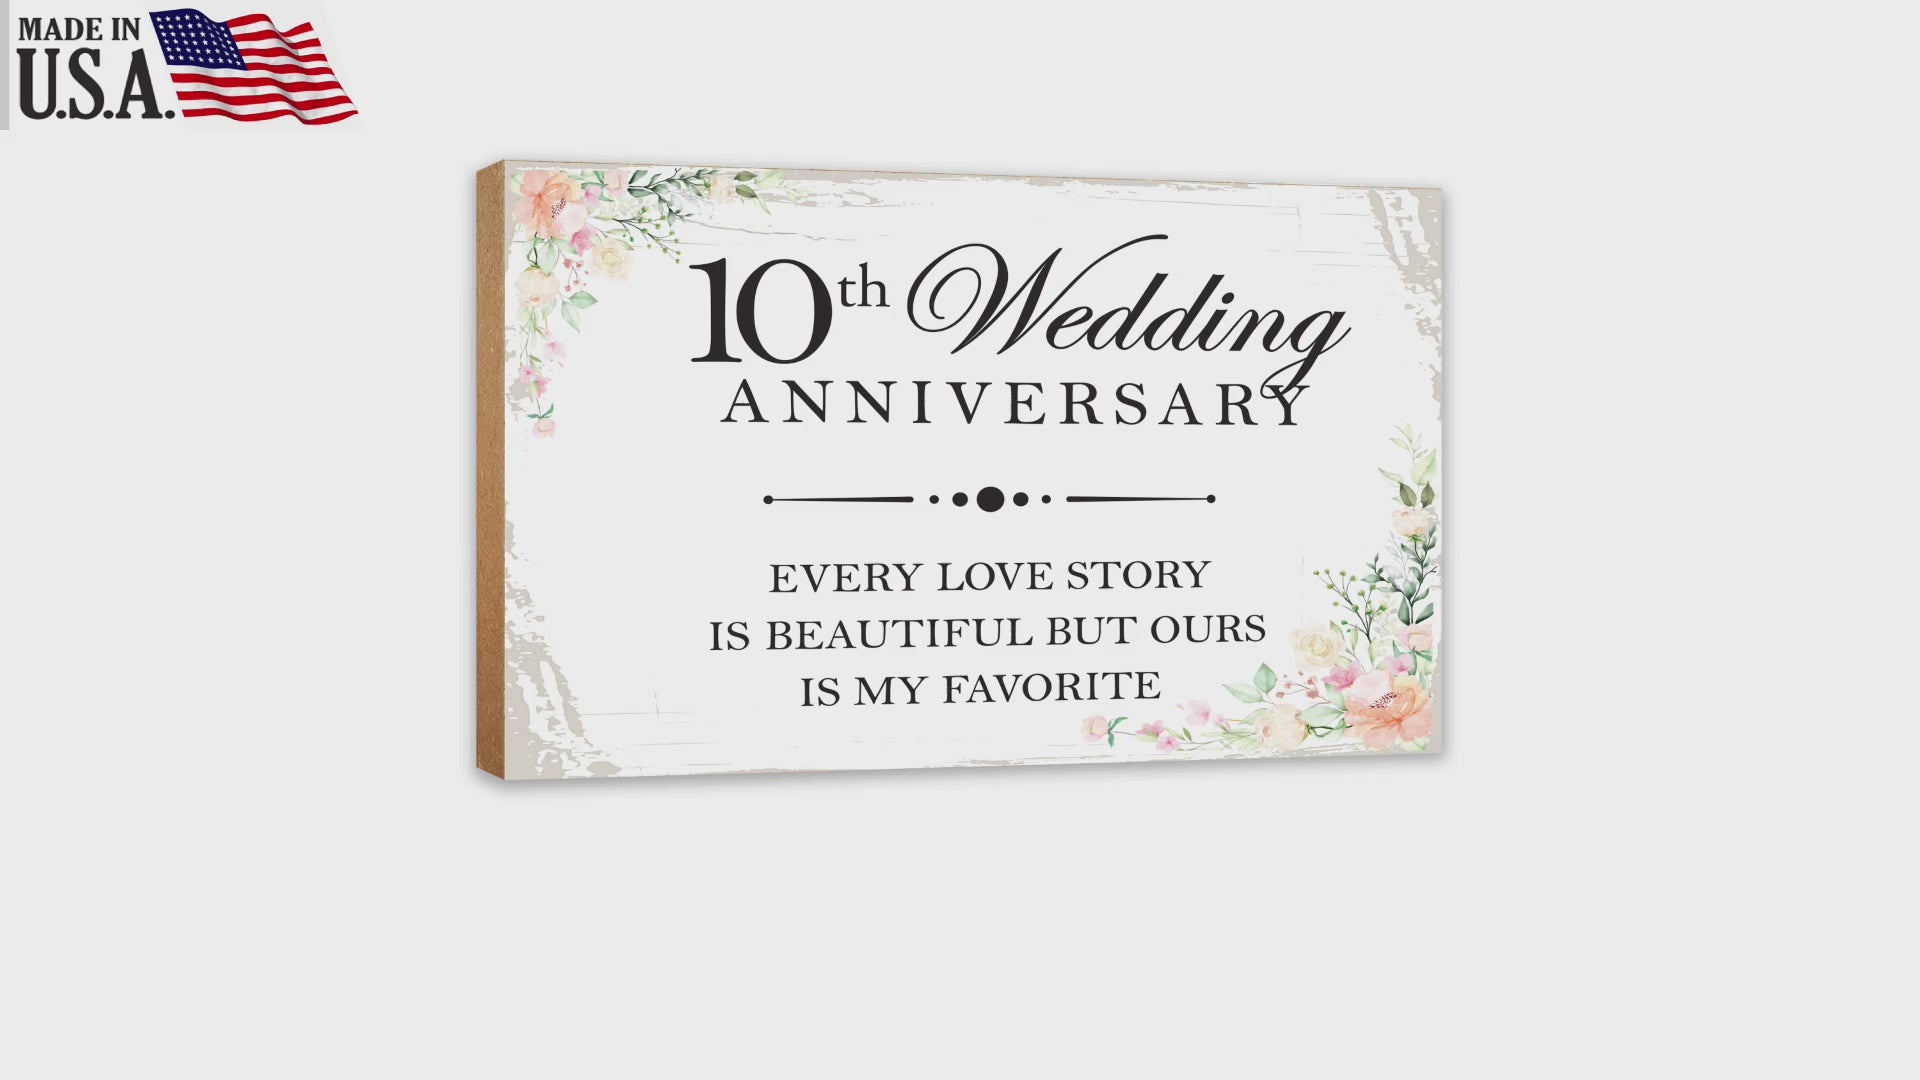 10th Wedding Anniversary Unique Shelf Decor and Tabletop Signs Gifts for Couples - Every Love Story